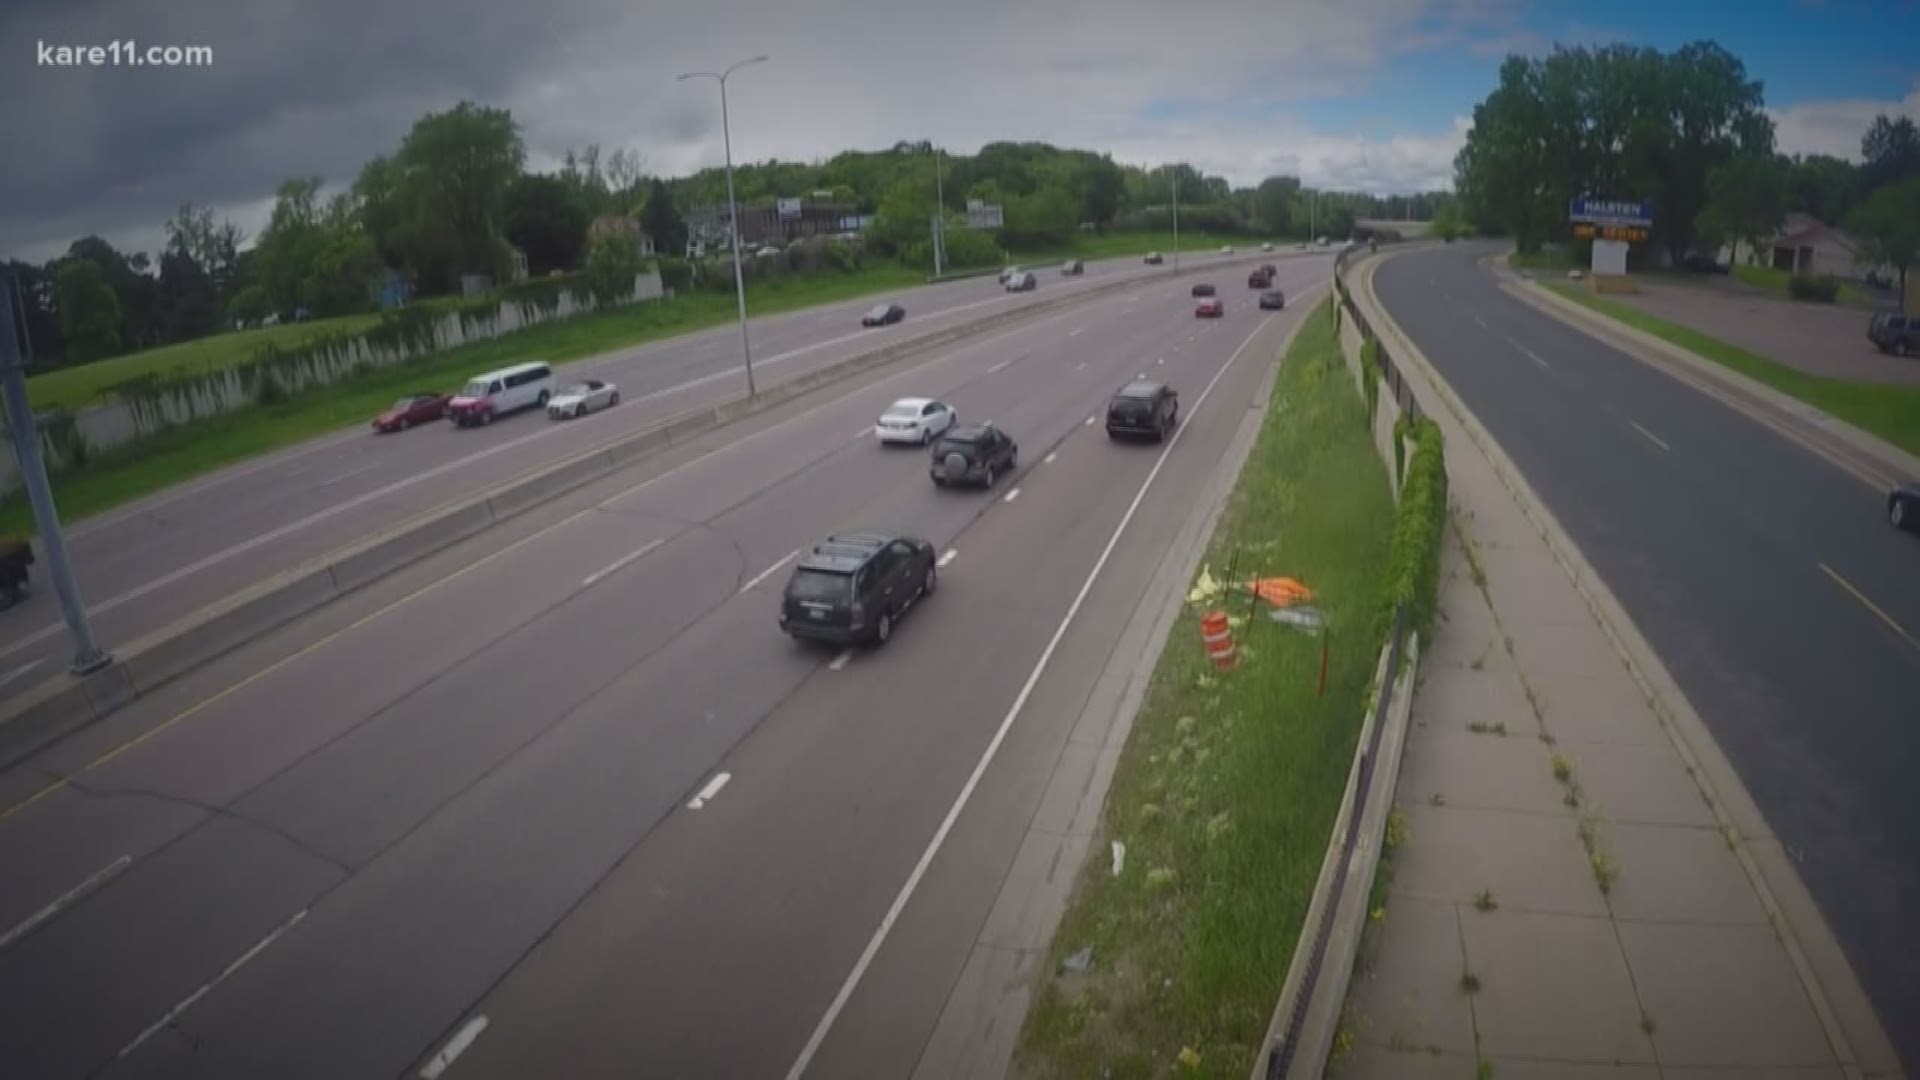 Over the past 5 years, the number of distraction-related crashes and fatalities has continued to climb despite countless efforts to change the laws and change drivers behavior. https://kare11.tv/2z2SD5S